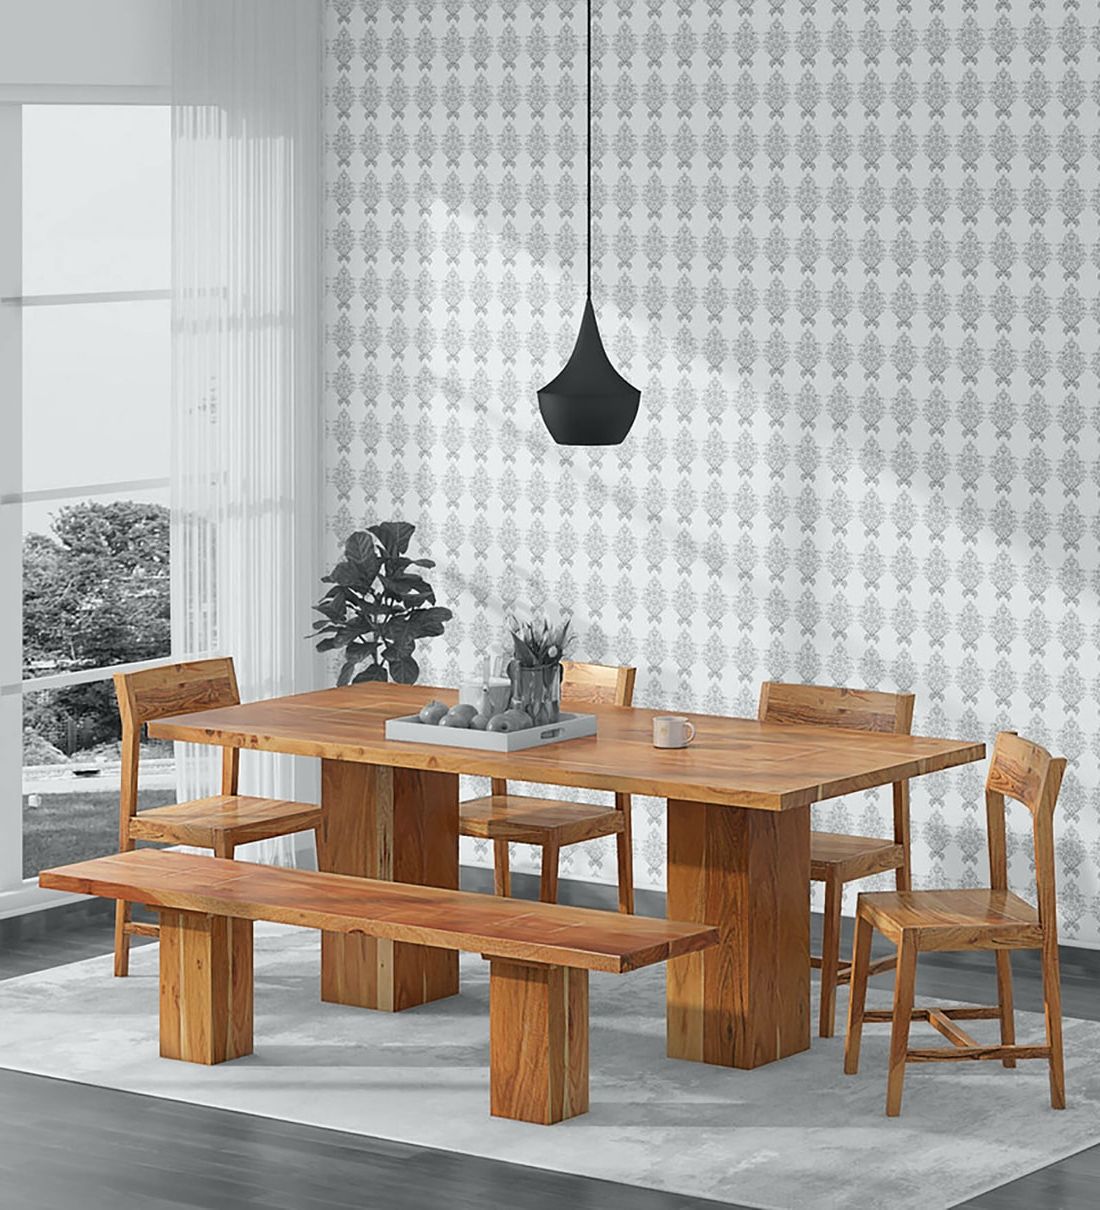 Fashionable Buy Portland Solid Wood 6 Seater Dining Set In Natural Acacia Finish Within Natural Acacia Wood Bistro Dining Sets (View 10 of 15)